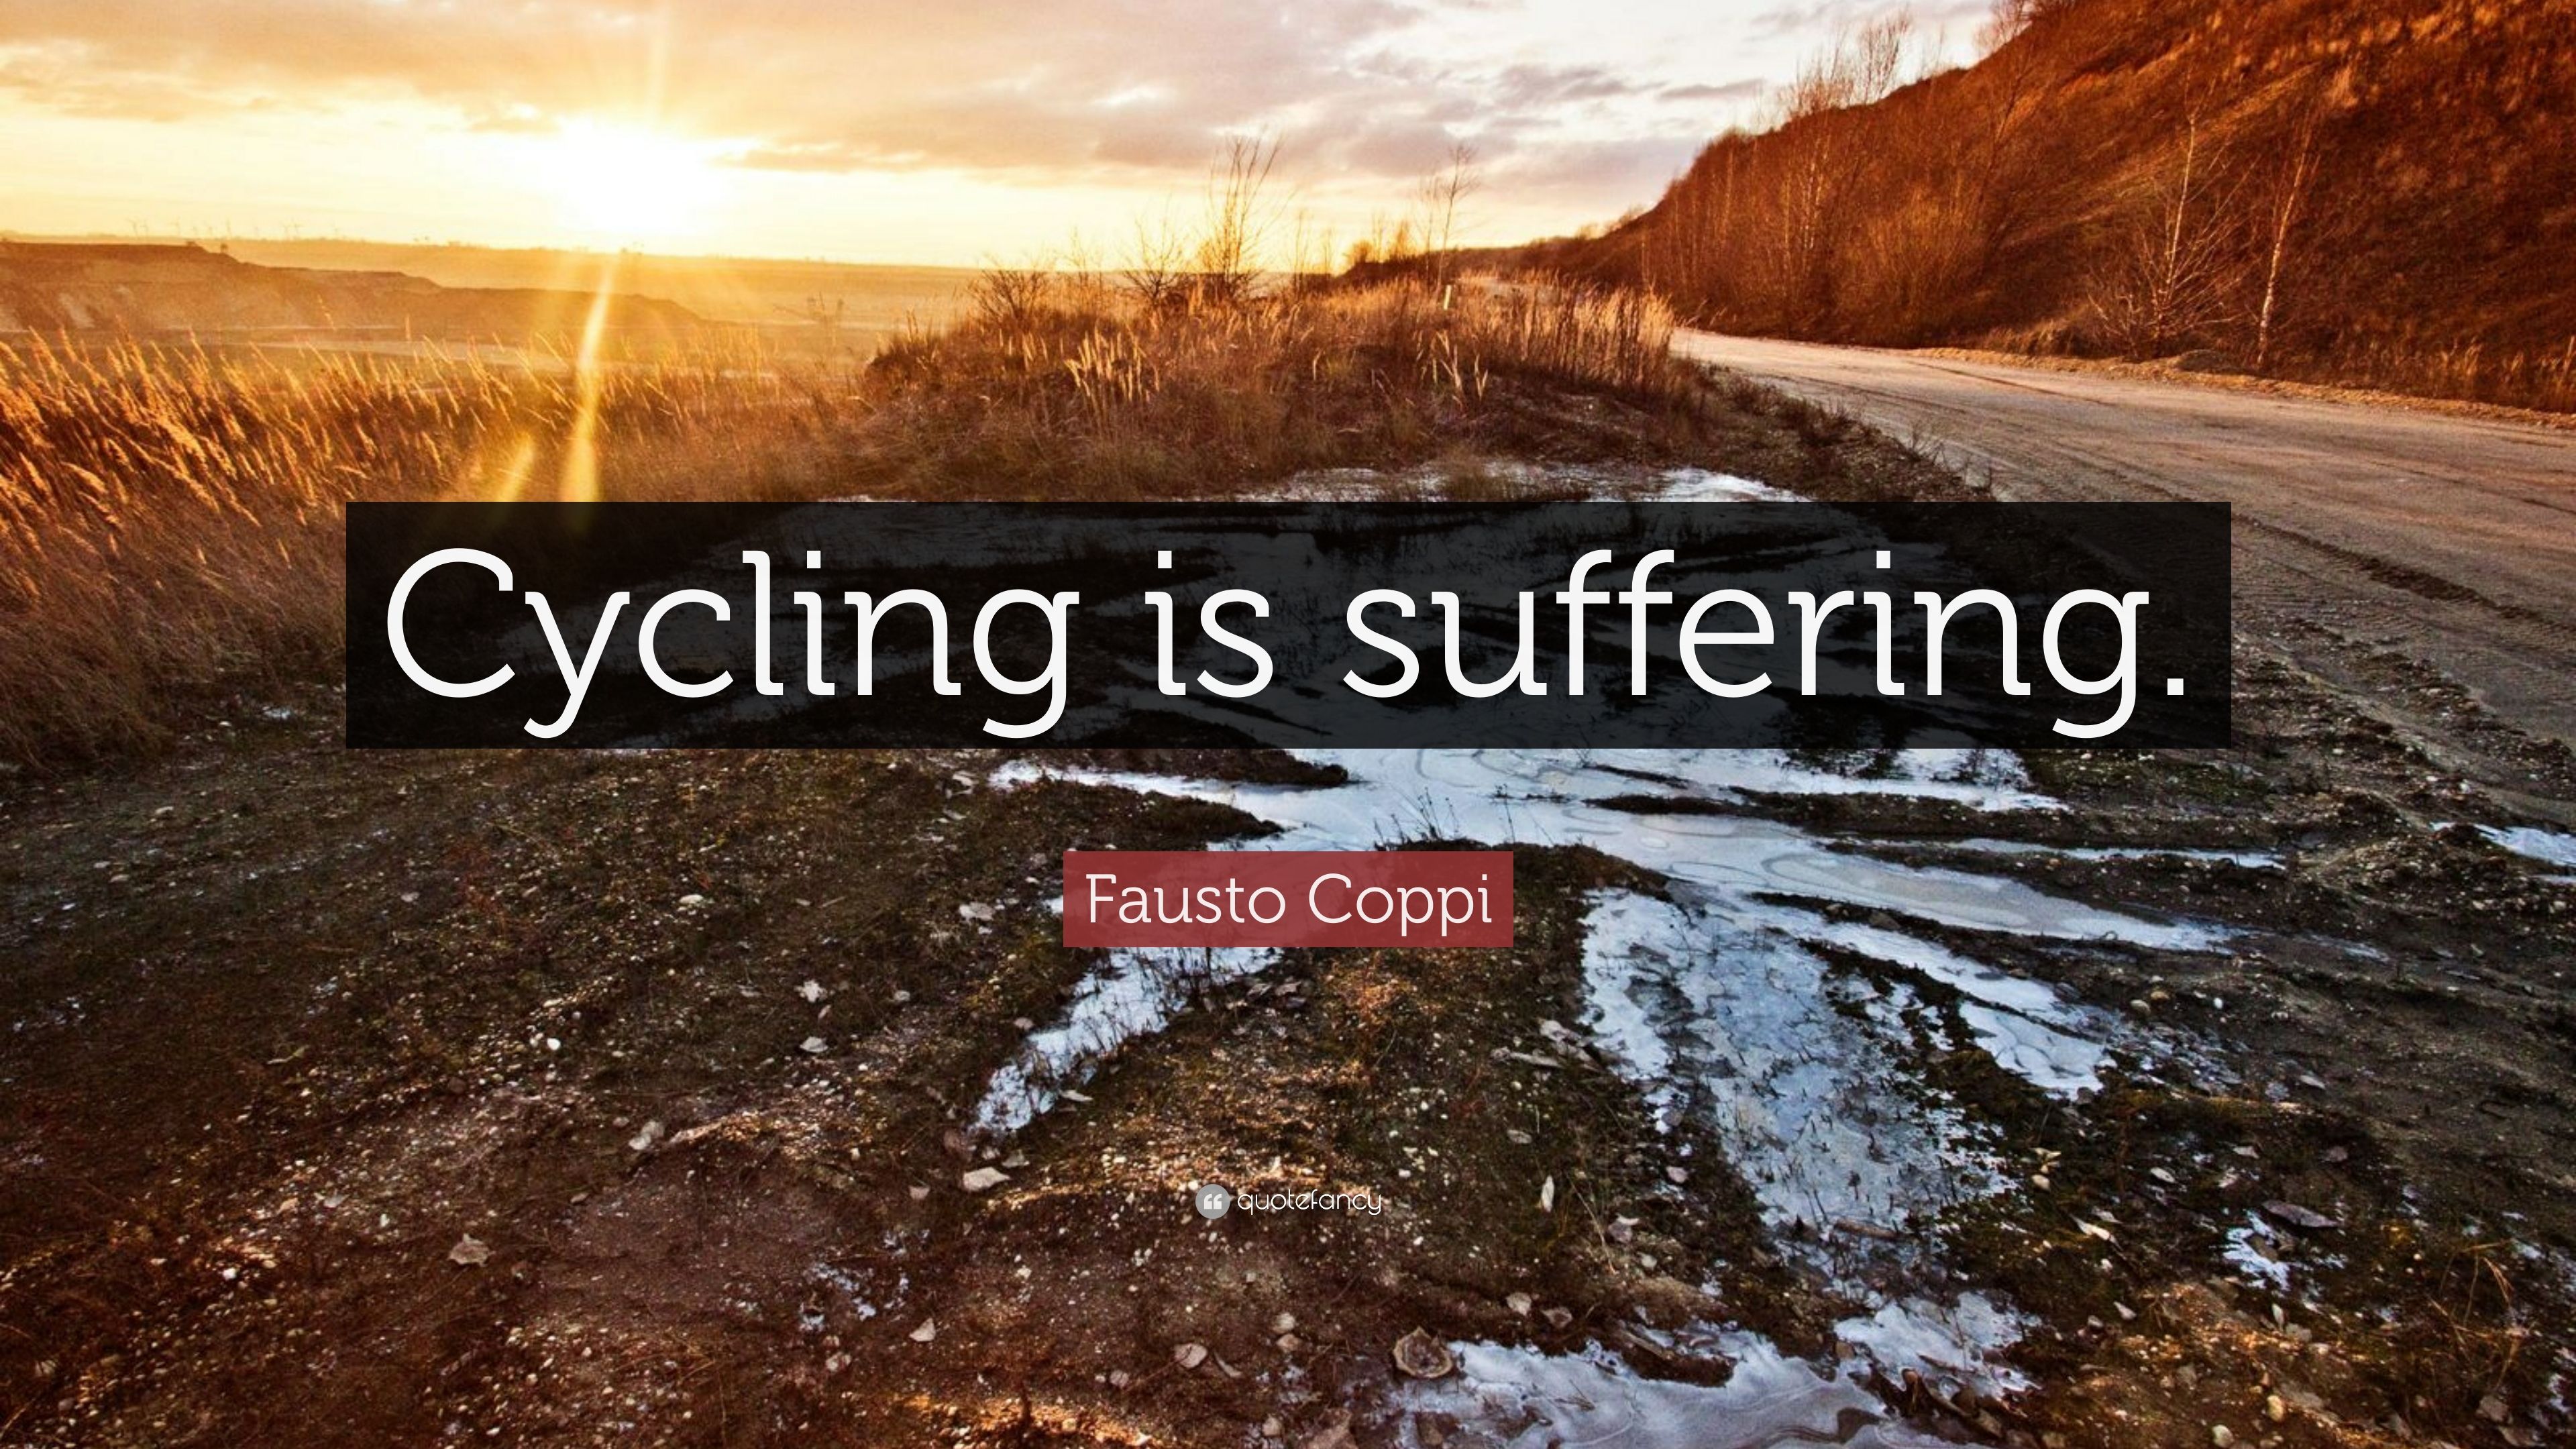 Fausto Coppi Quote: “Cycling is suffering.” 12 wallpaper